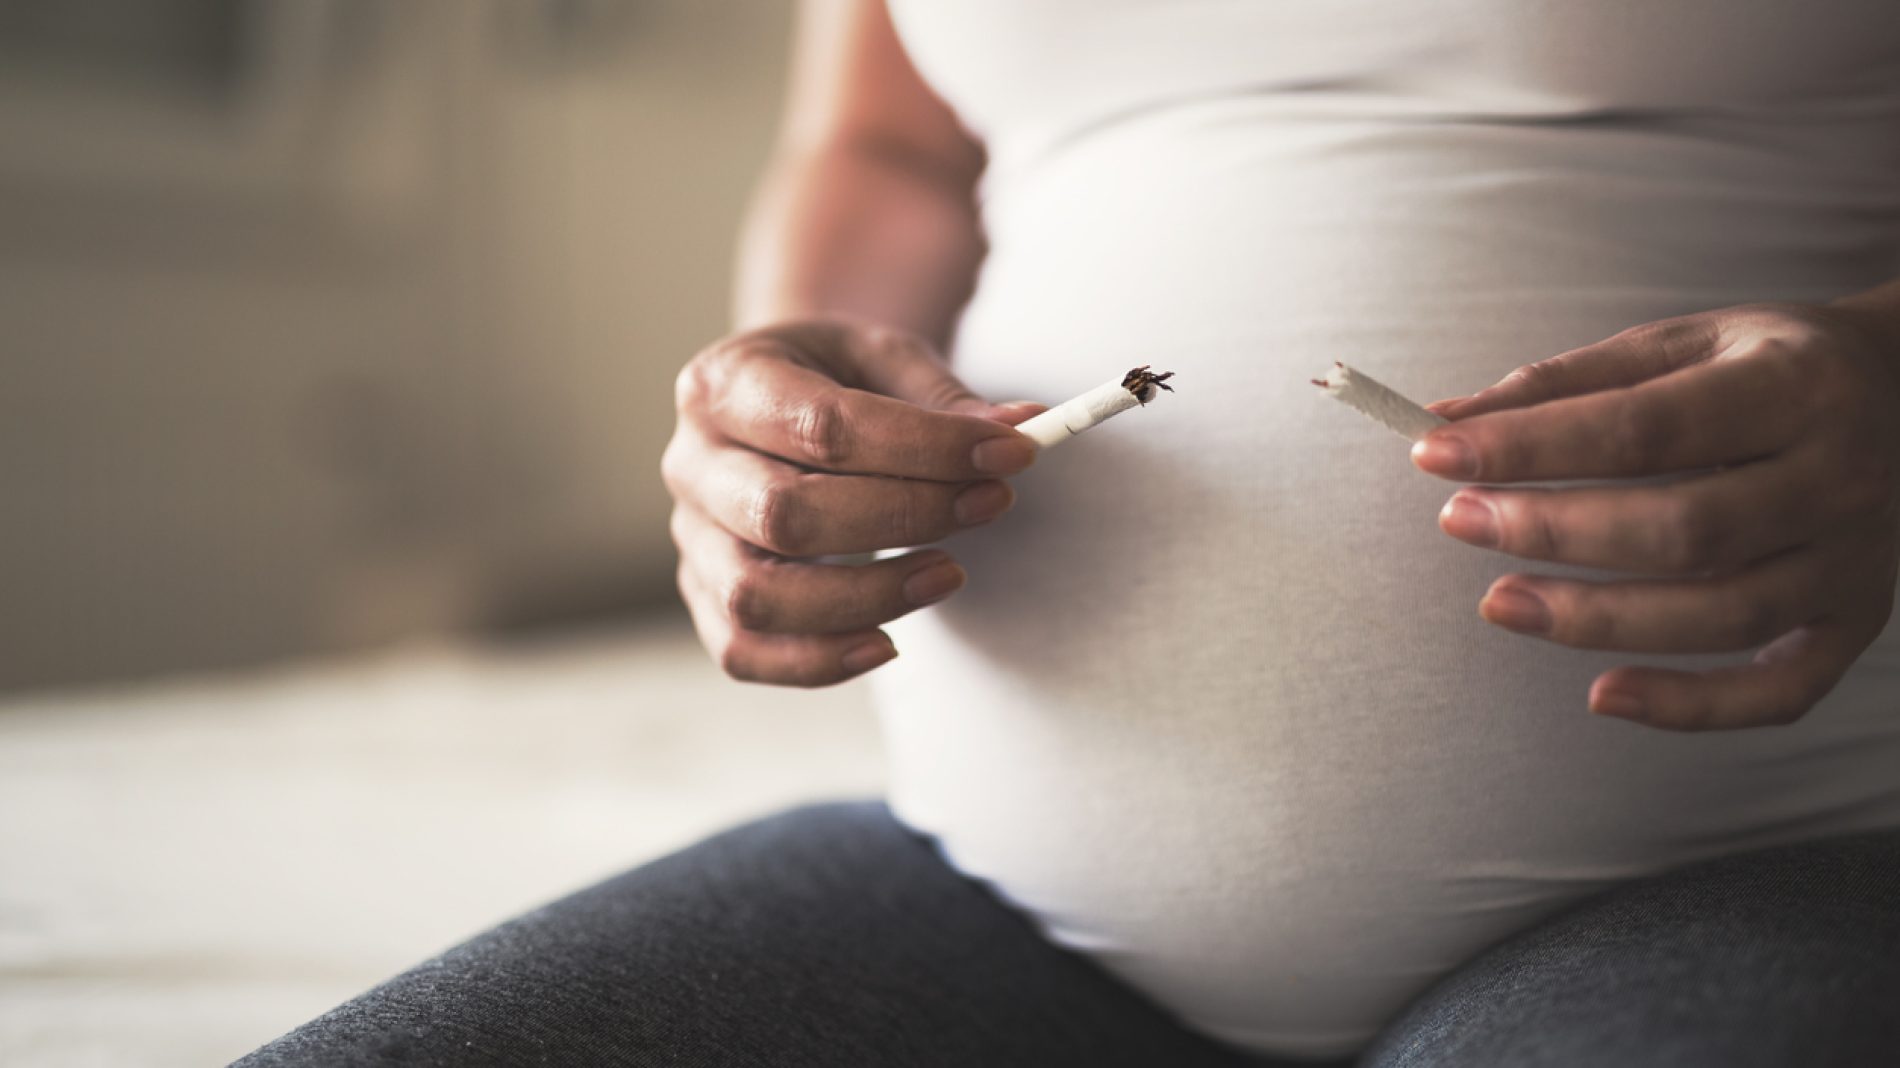 Smoking is a bad habit prohibited during pregnancy